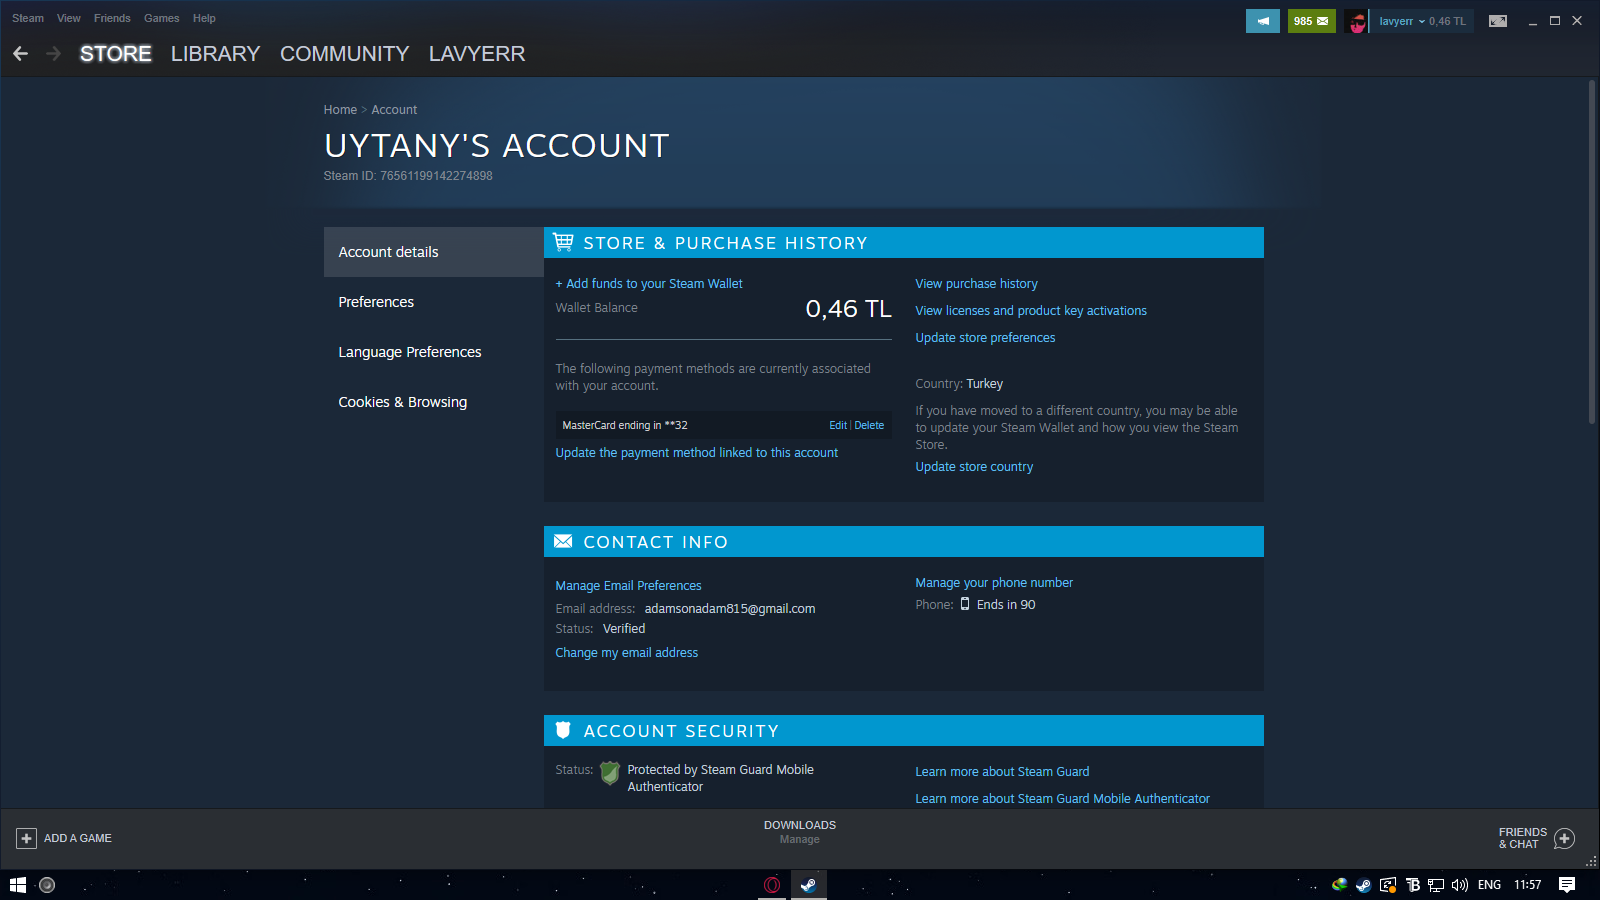 You are not currently logged in to a steam account фото 66